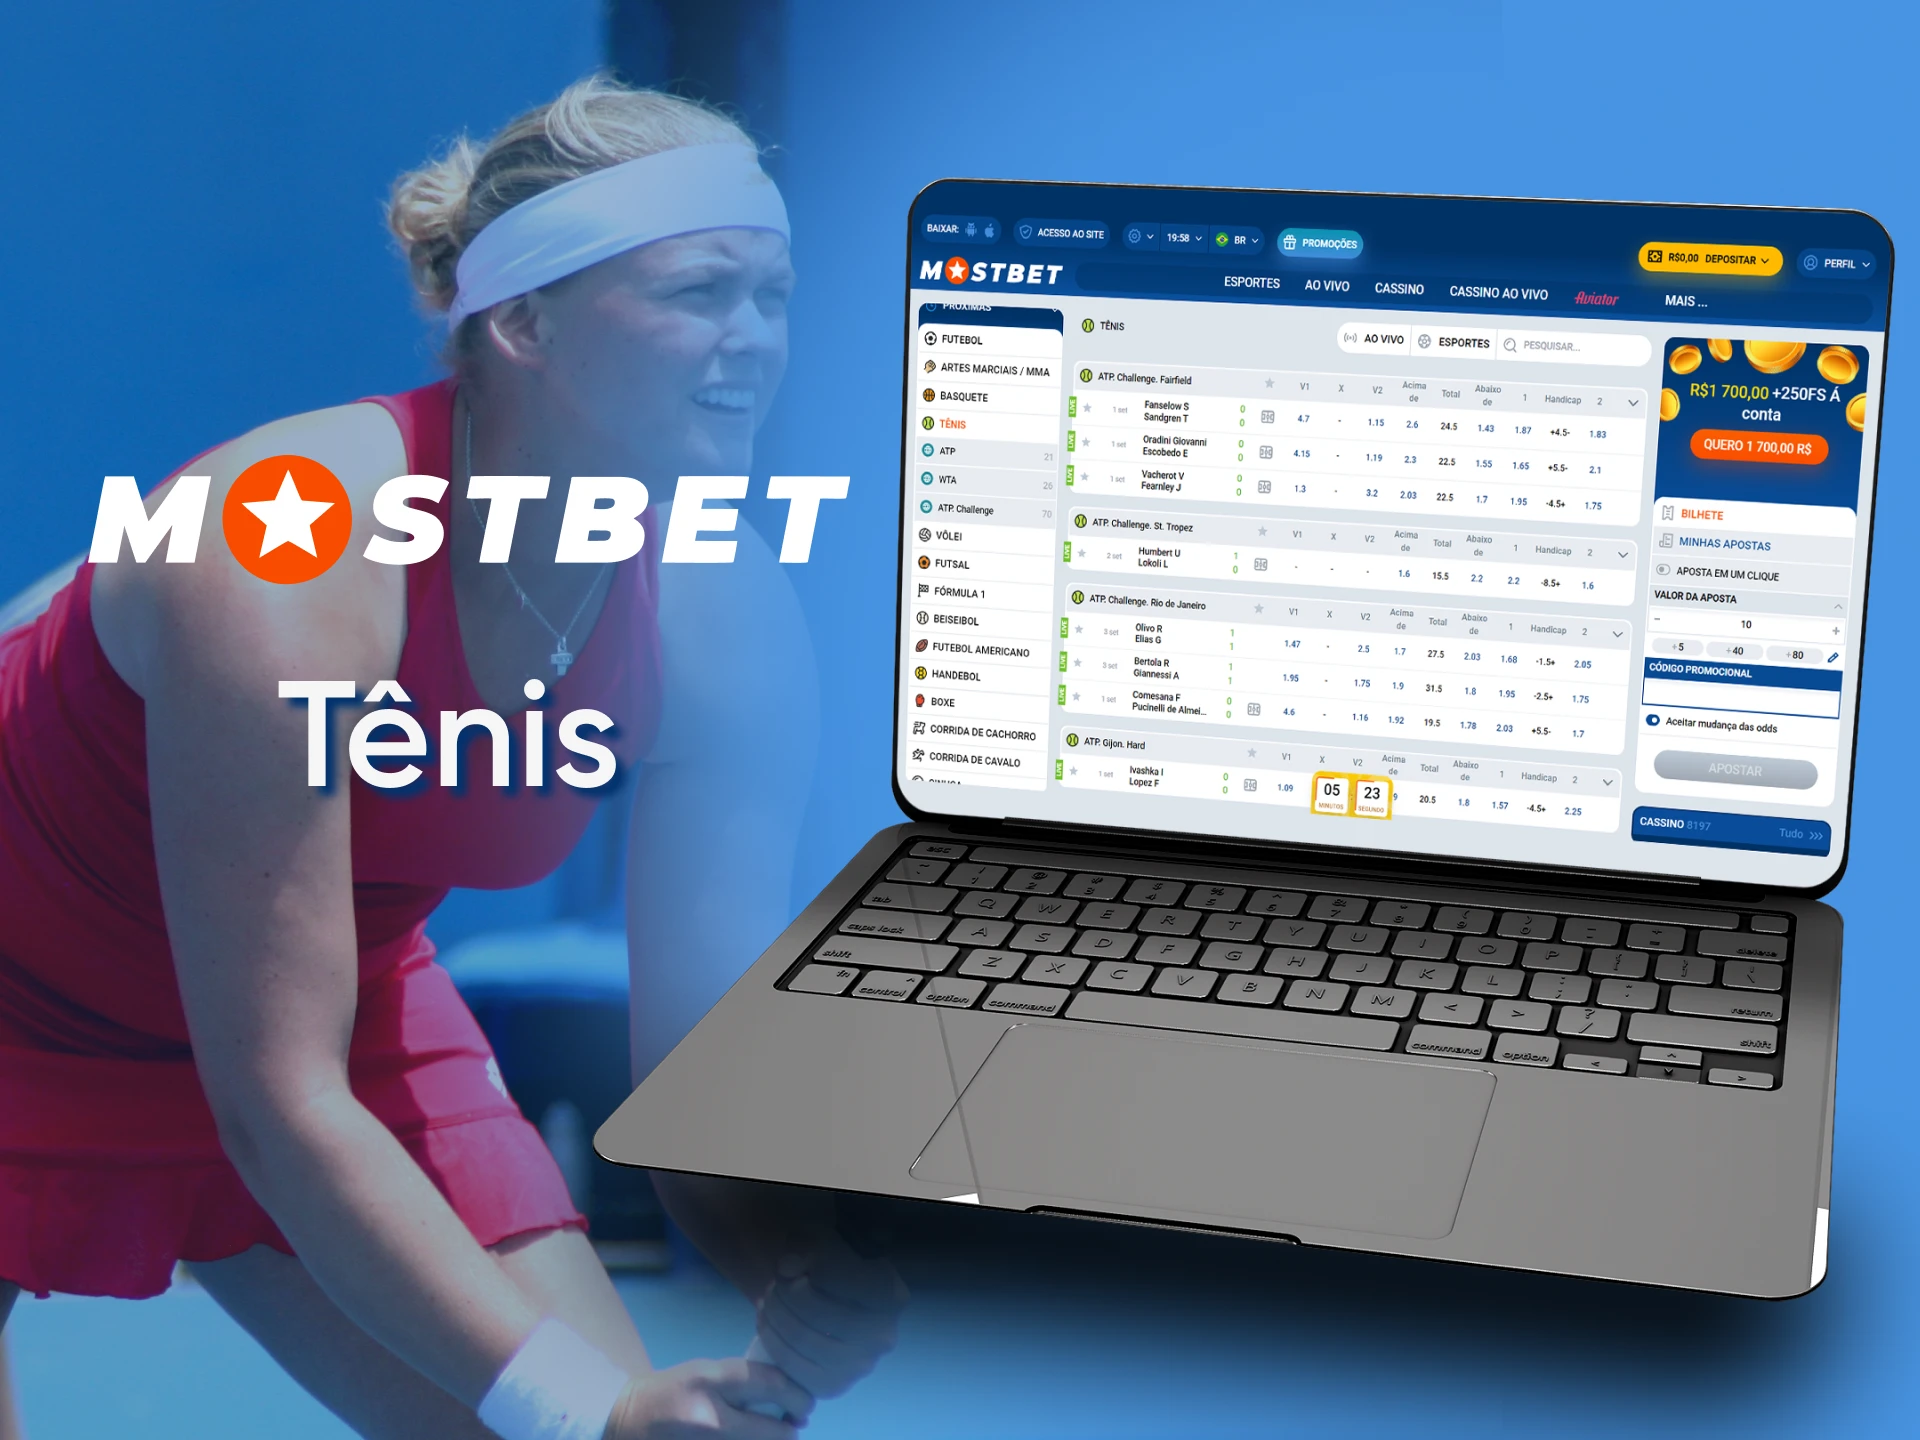 Bet on tennis with Mostbet.